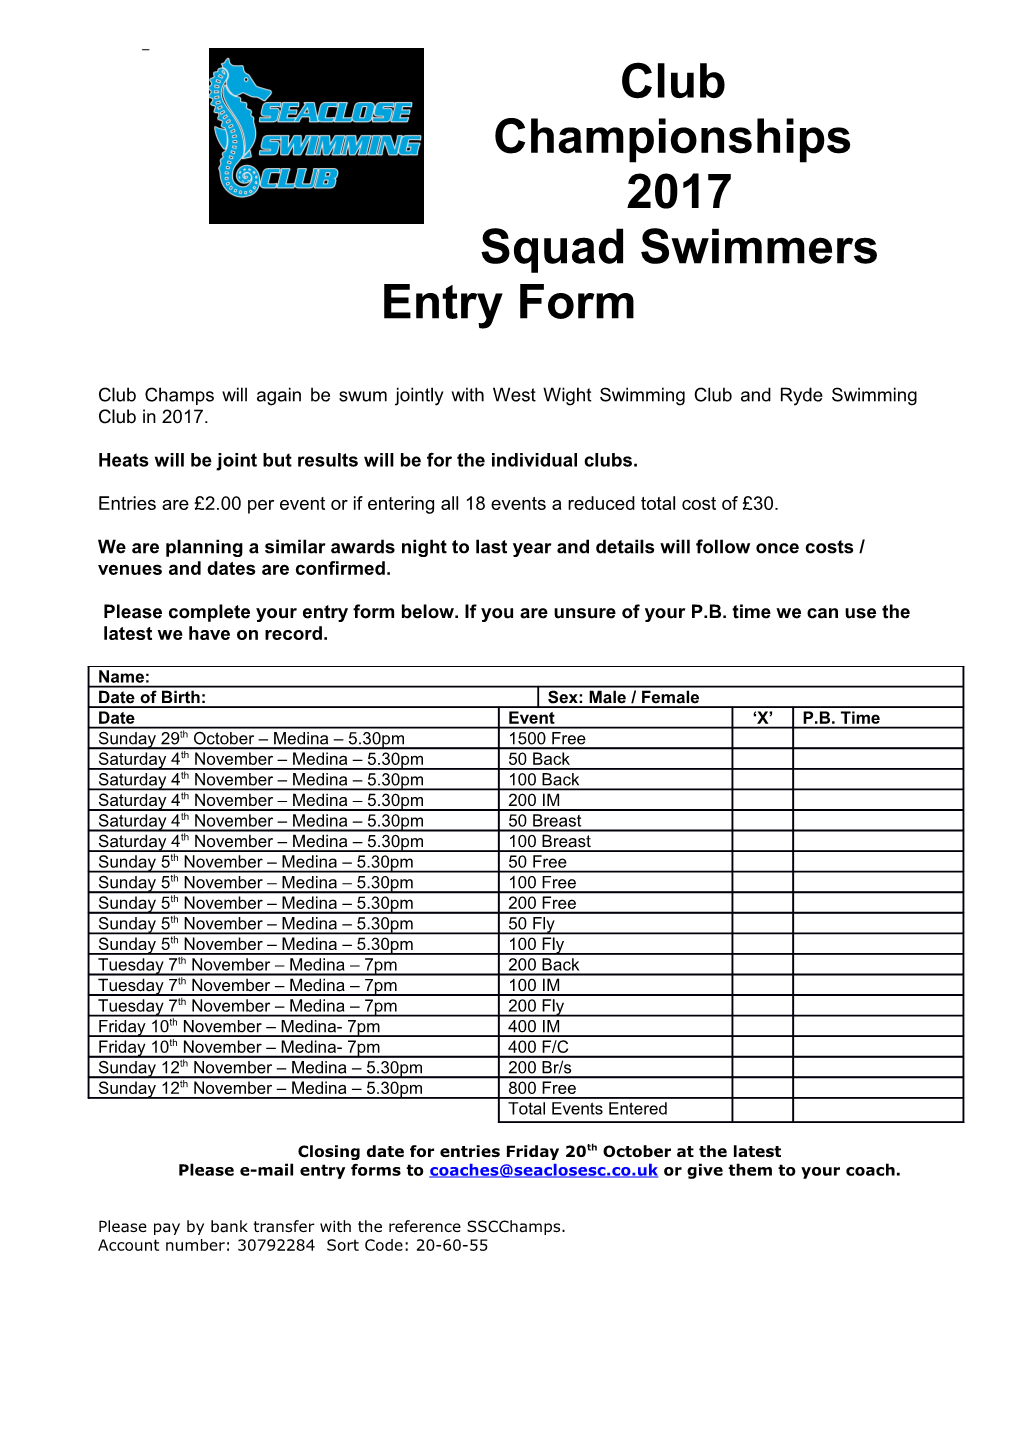 Squad Swimmers Entry Form